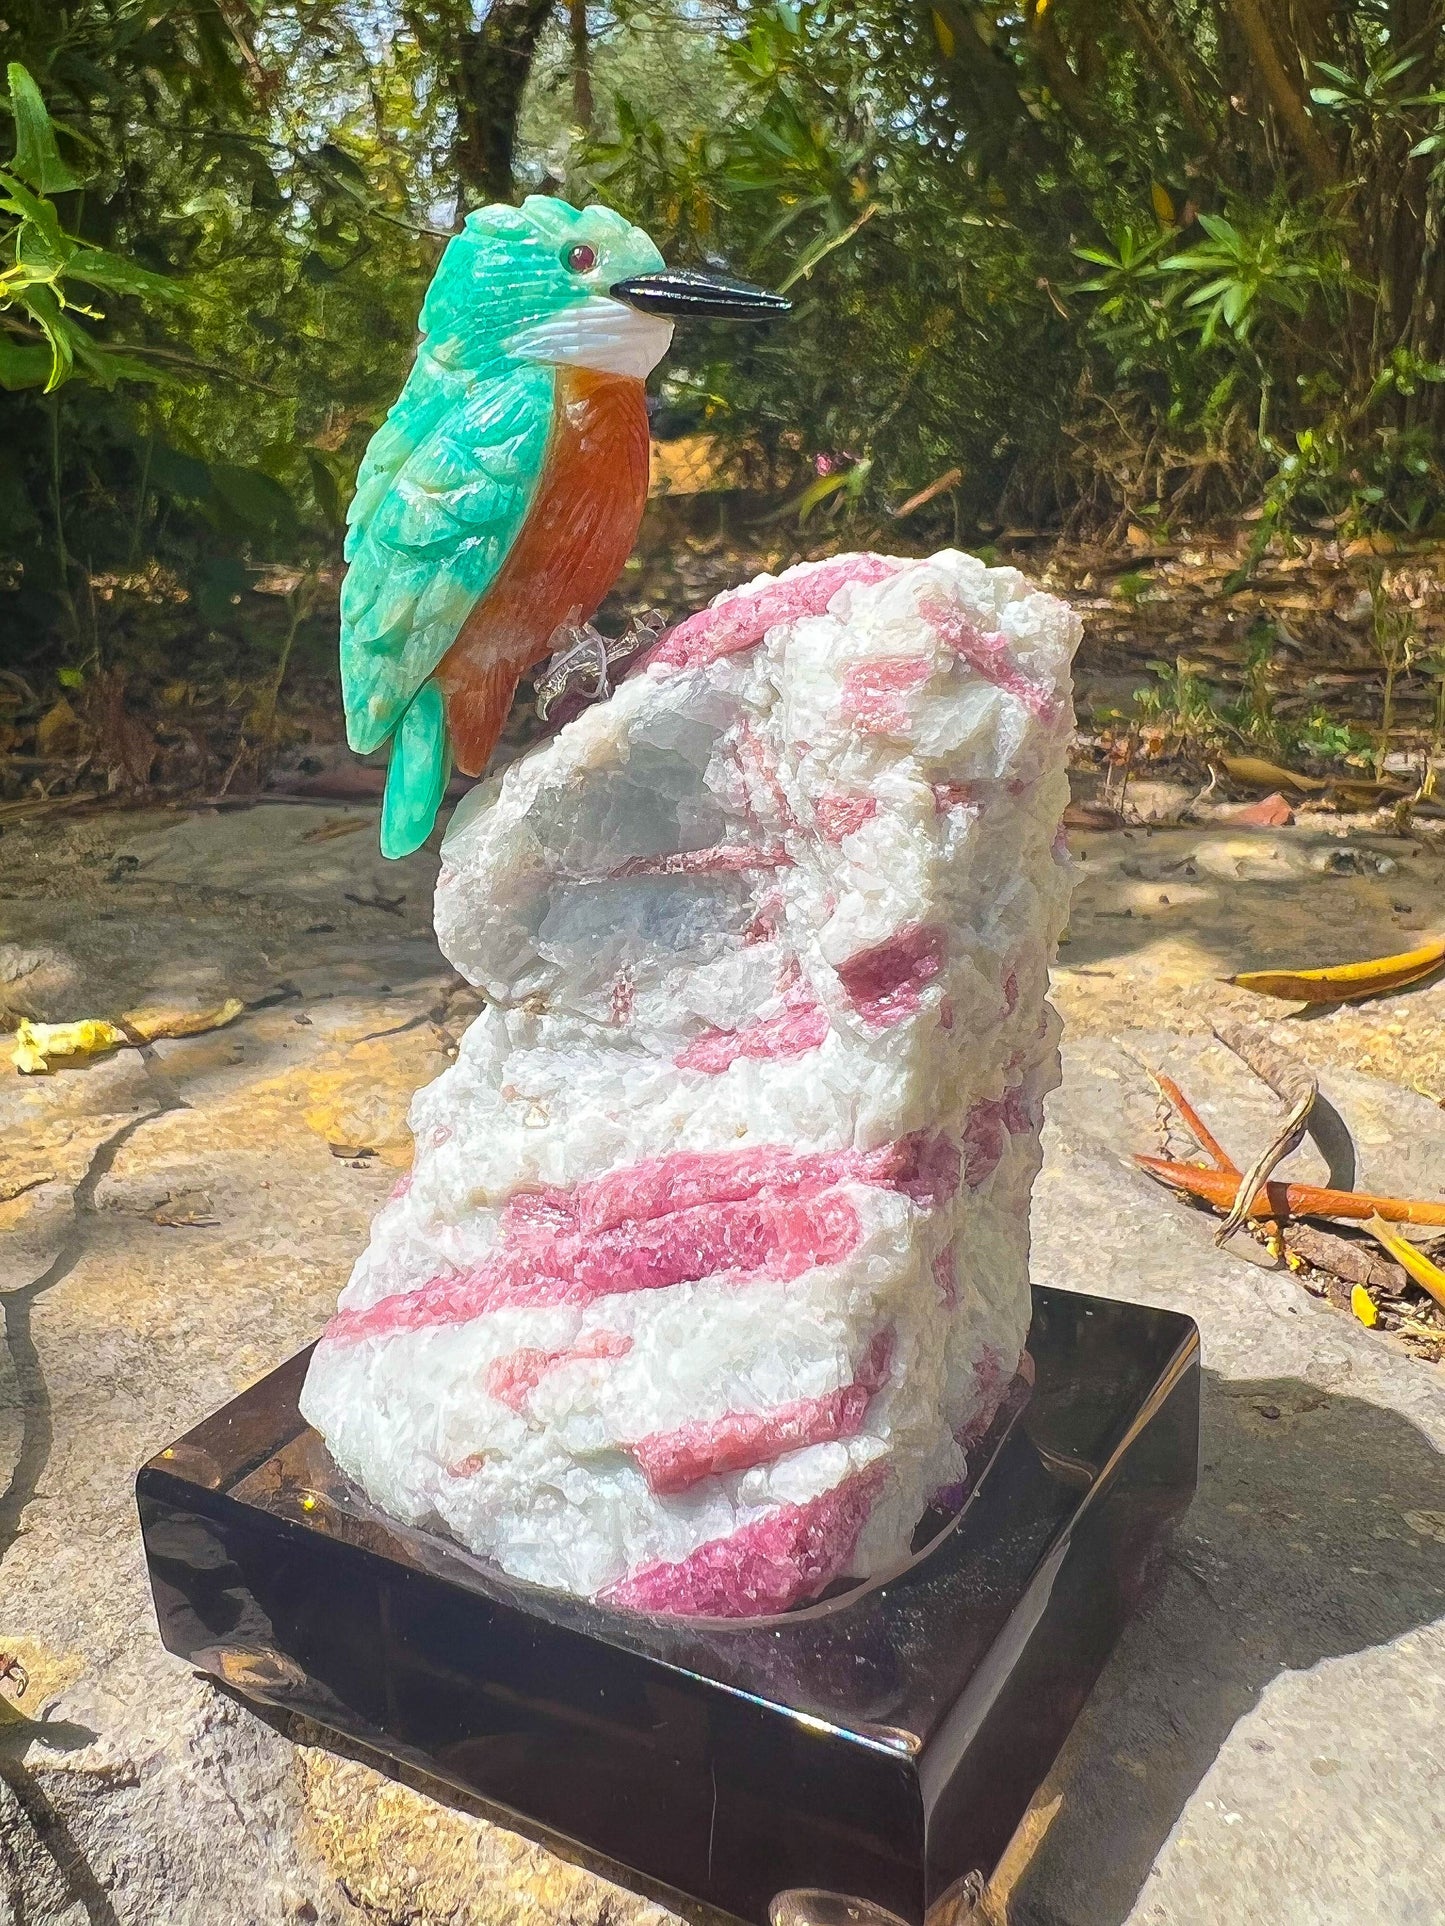 Turquoise & Carnelian Carved Kingfisher on Pink tourmaline in Quartz